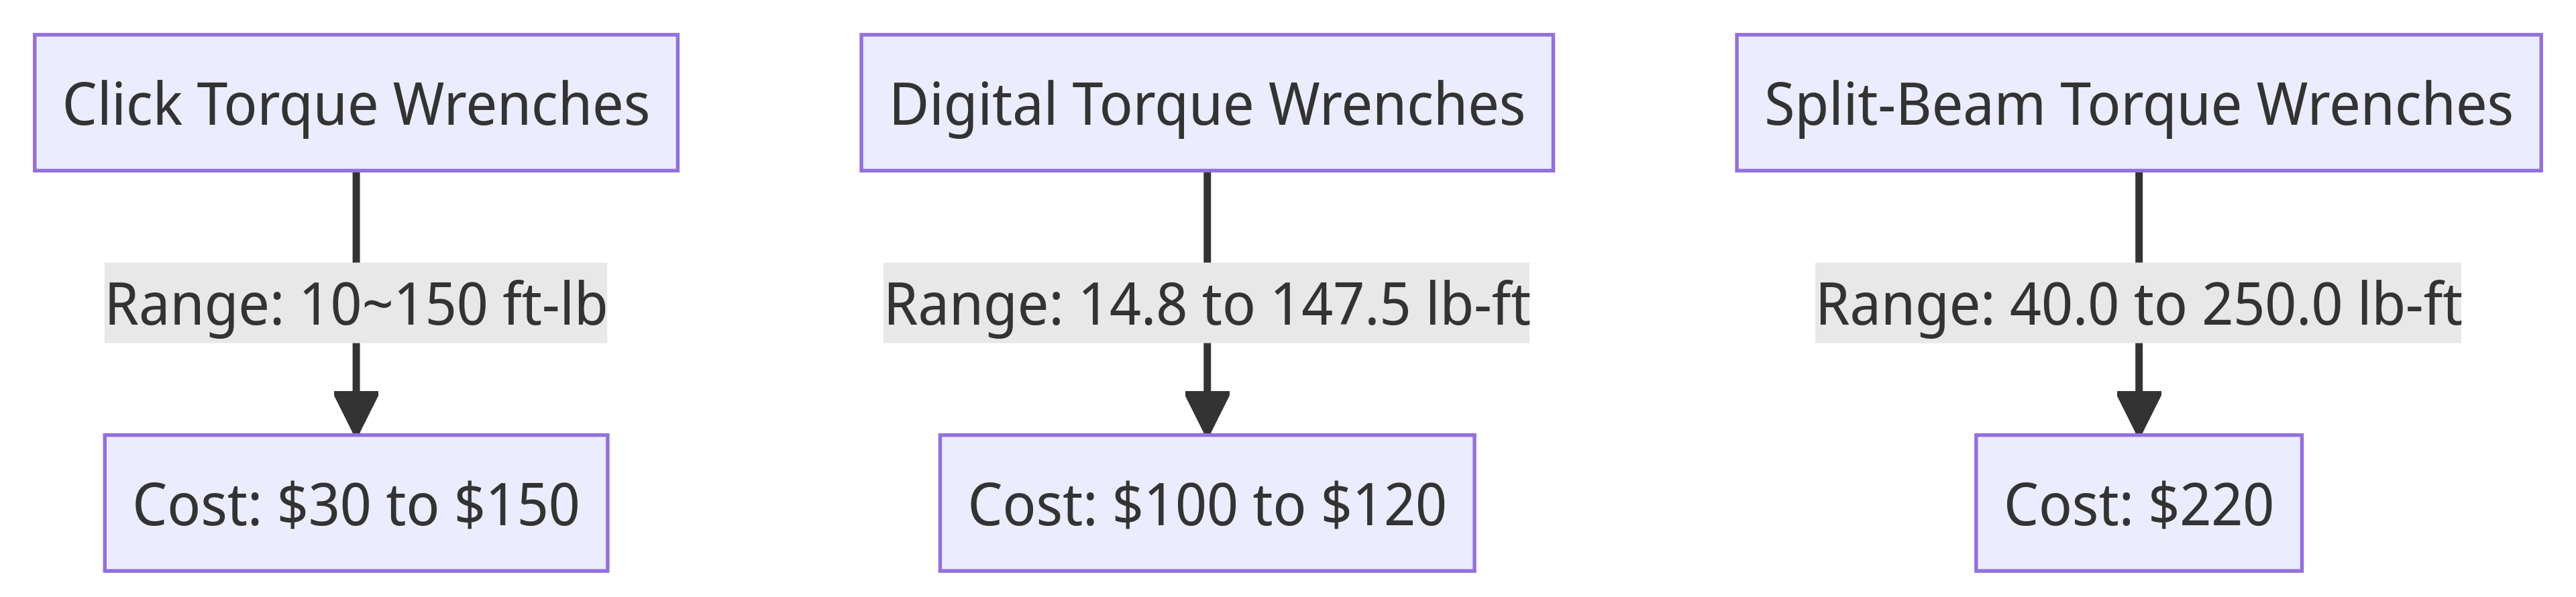 Flow Chart of Torque Wrench Types and Prices